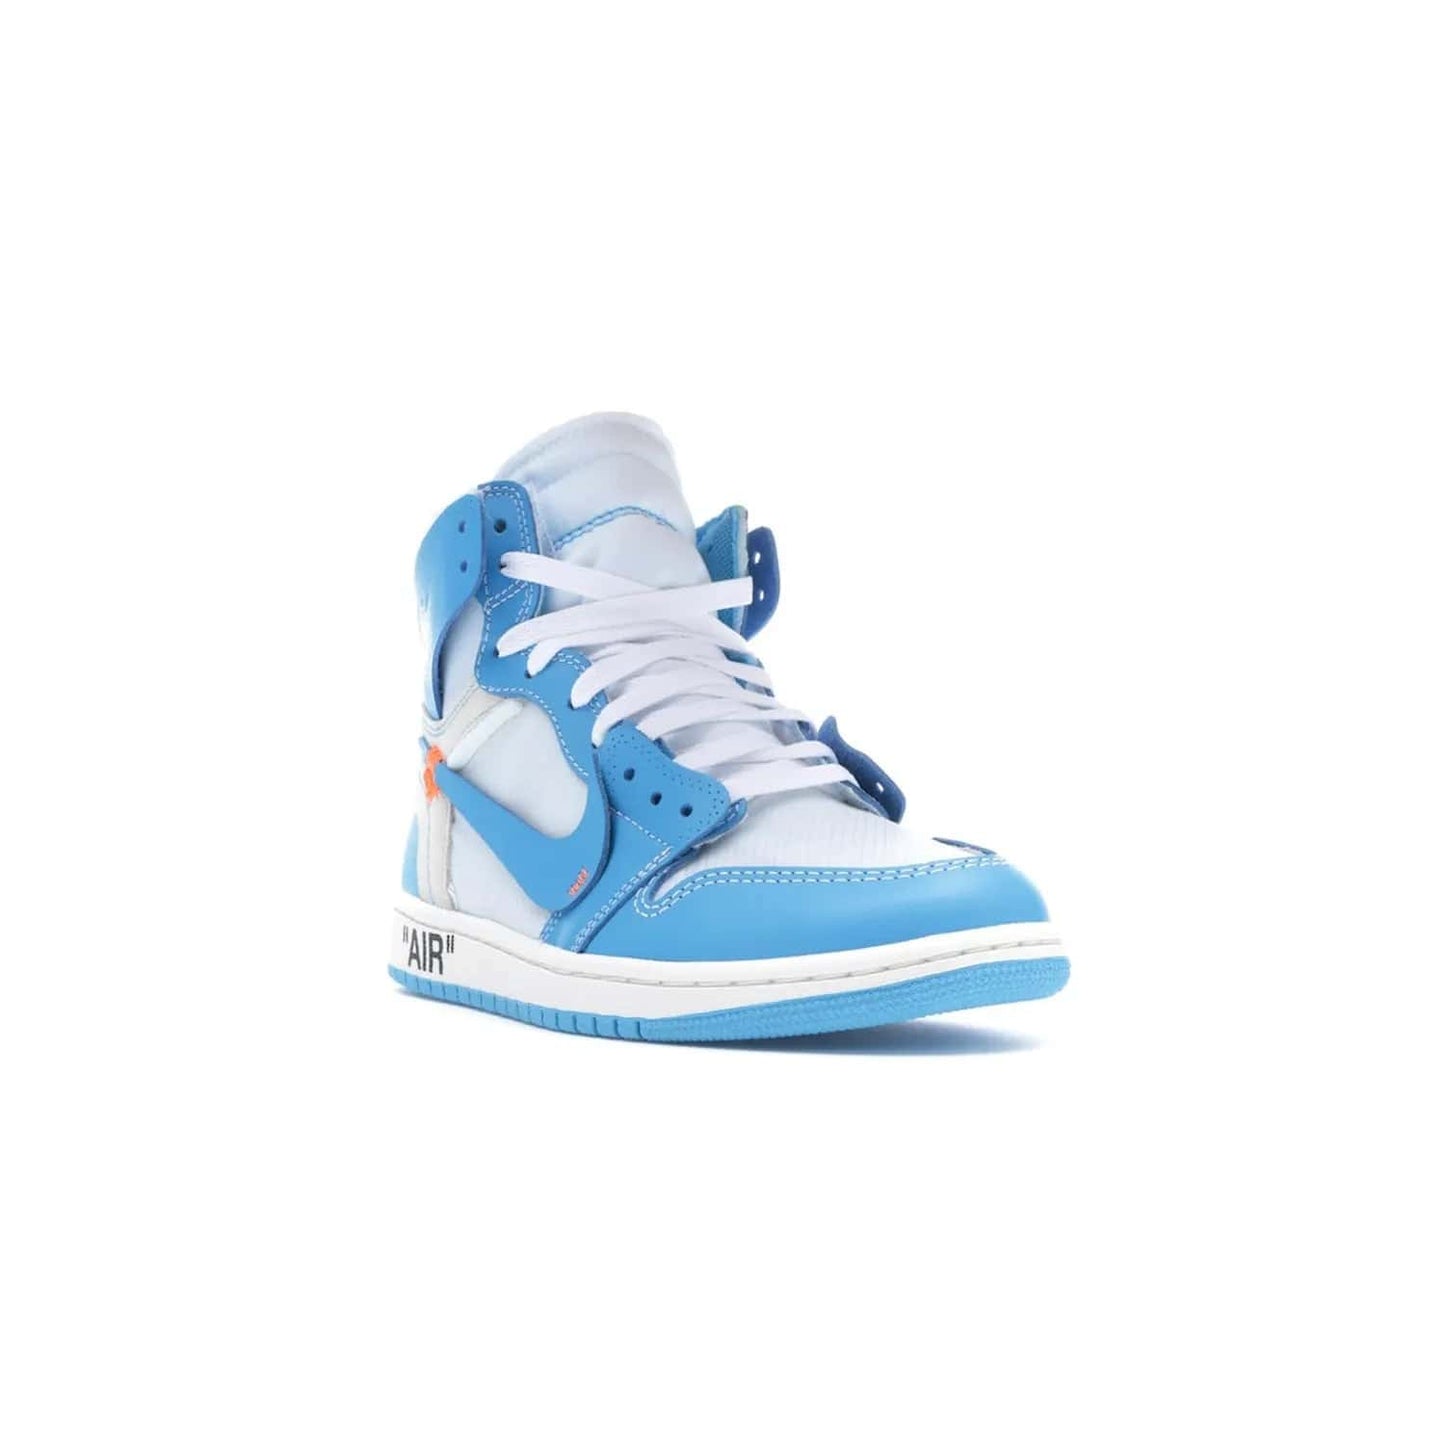 Jordan 1 Retro High Off-White University Blue - Image 7 - Only at www.BallersClubKickz.com - Classic Jordan 1 Retro High "Off-White UNC" sneakers meld style and comfort. Boasting deconstructed white and blue leather, Off-White detailing, and a white, dark powder blue and cone colorway, these sneakers are perfect for dressing up or down. Get the iconic Off-White Jordan 1's and upgrade your look.